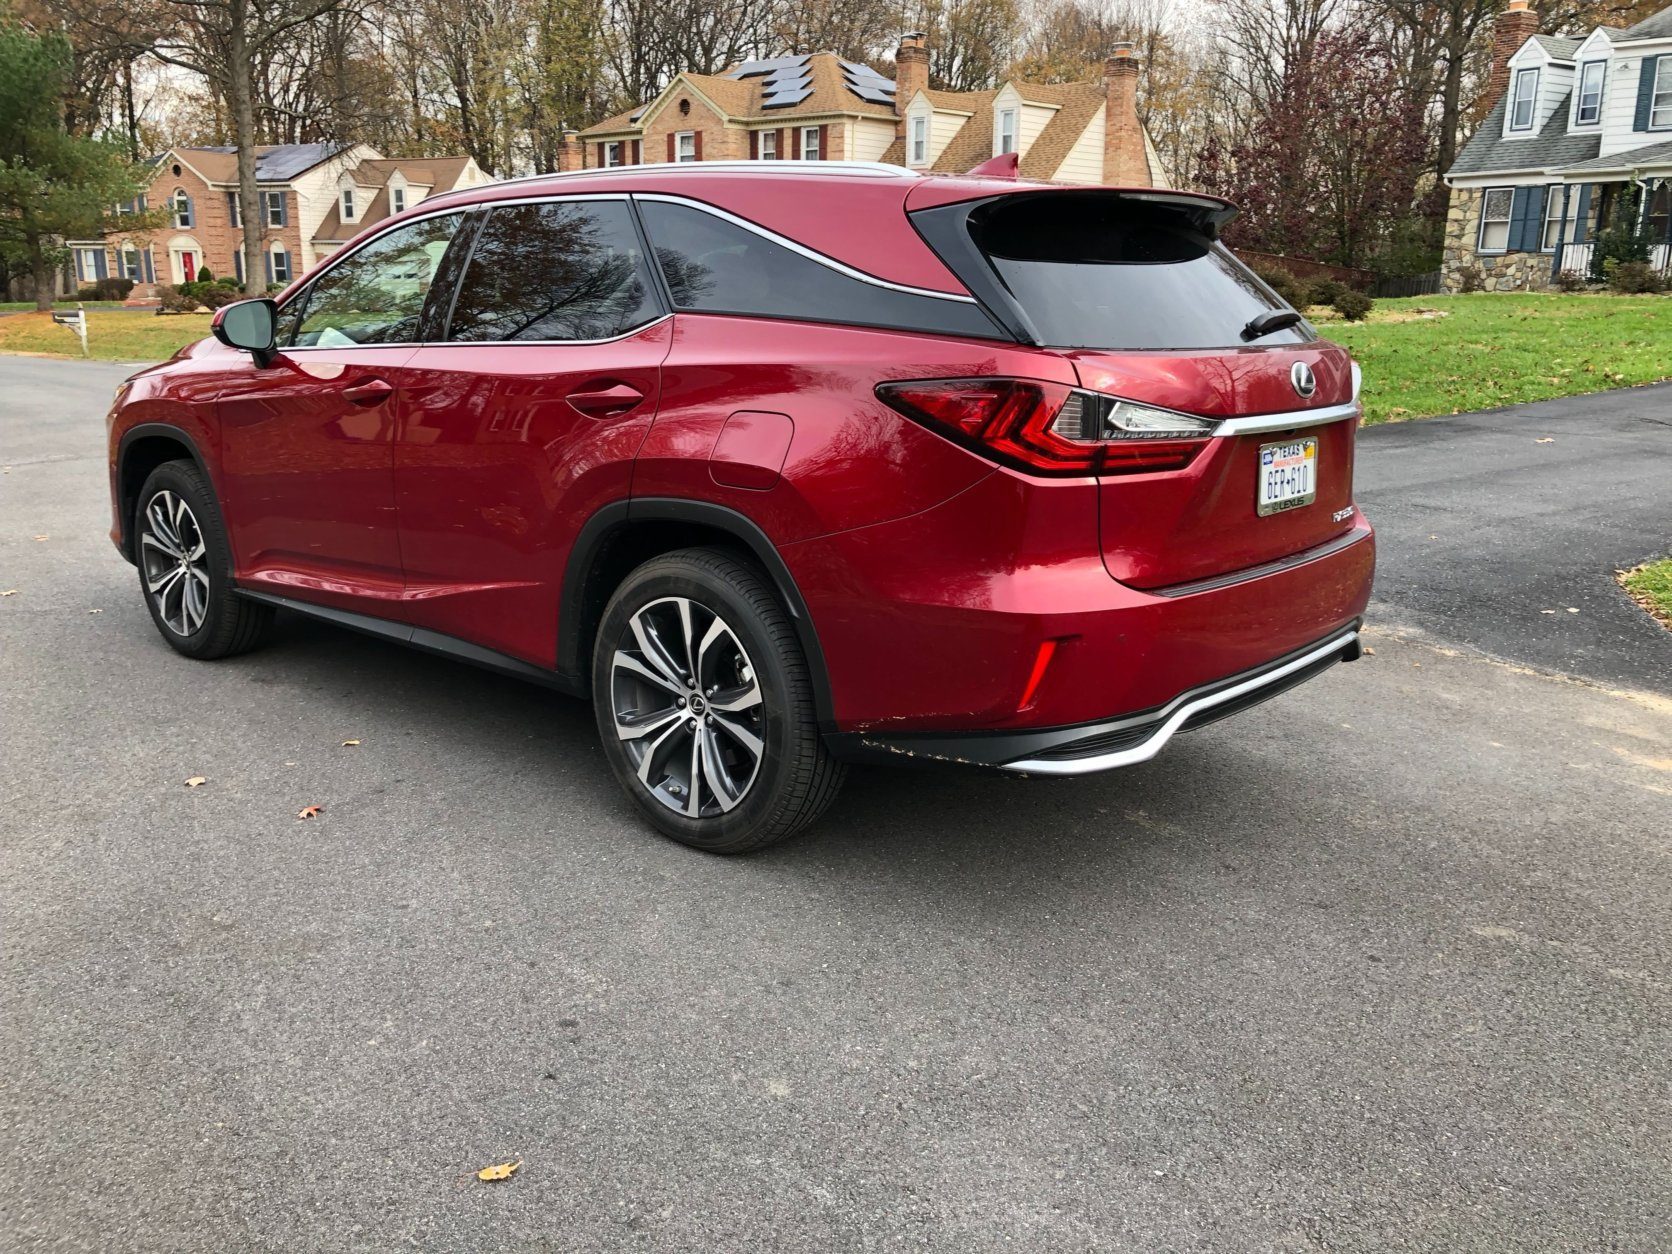 <p>The Lexus RX 350 is a popular crossover but it wasn’t always big enough. Now with the new RX 350L joining the lineup, look for more of these luxury Utes hitting the road. You can’t miss it.</p>
